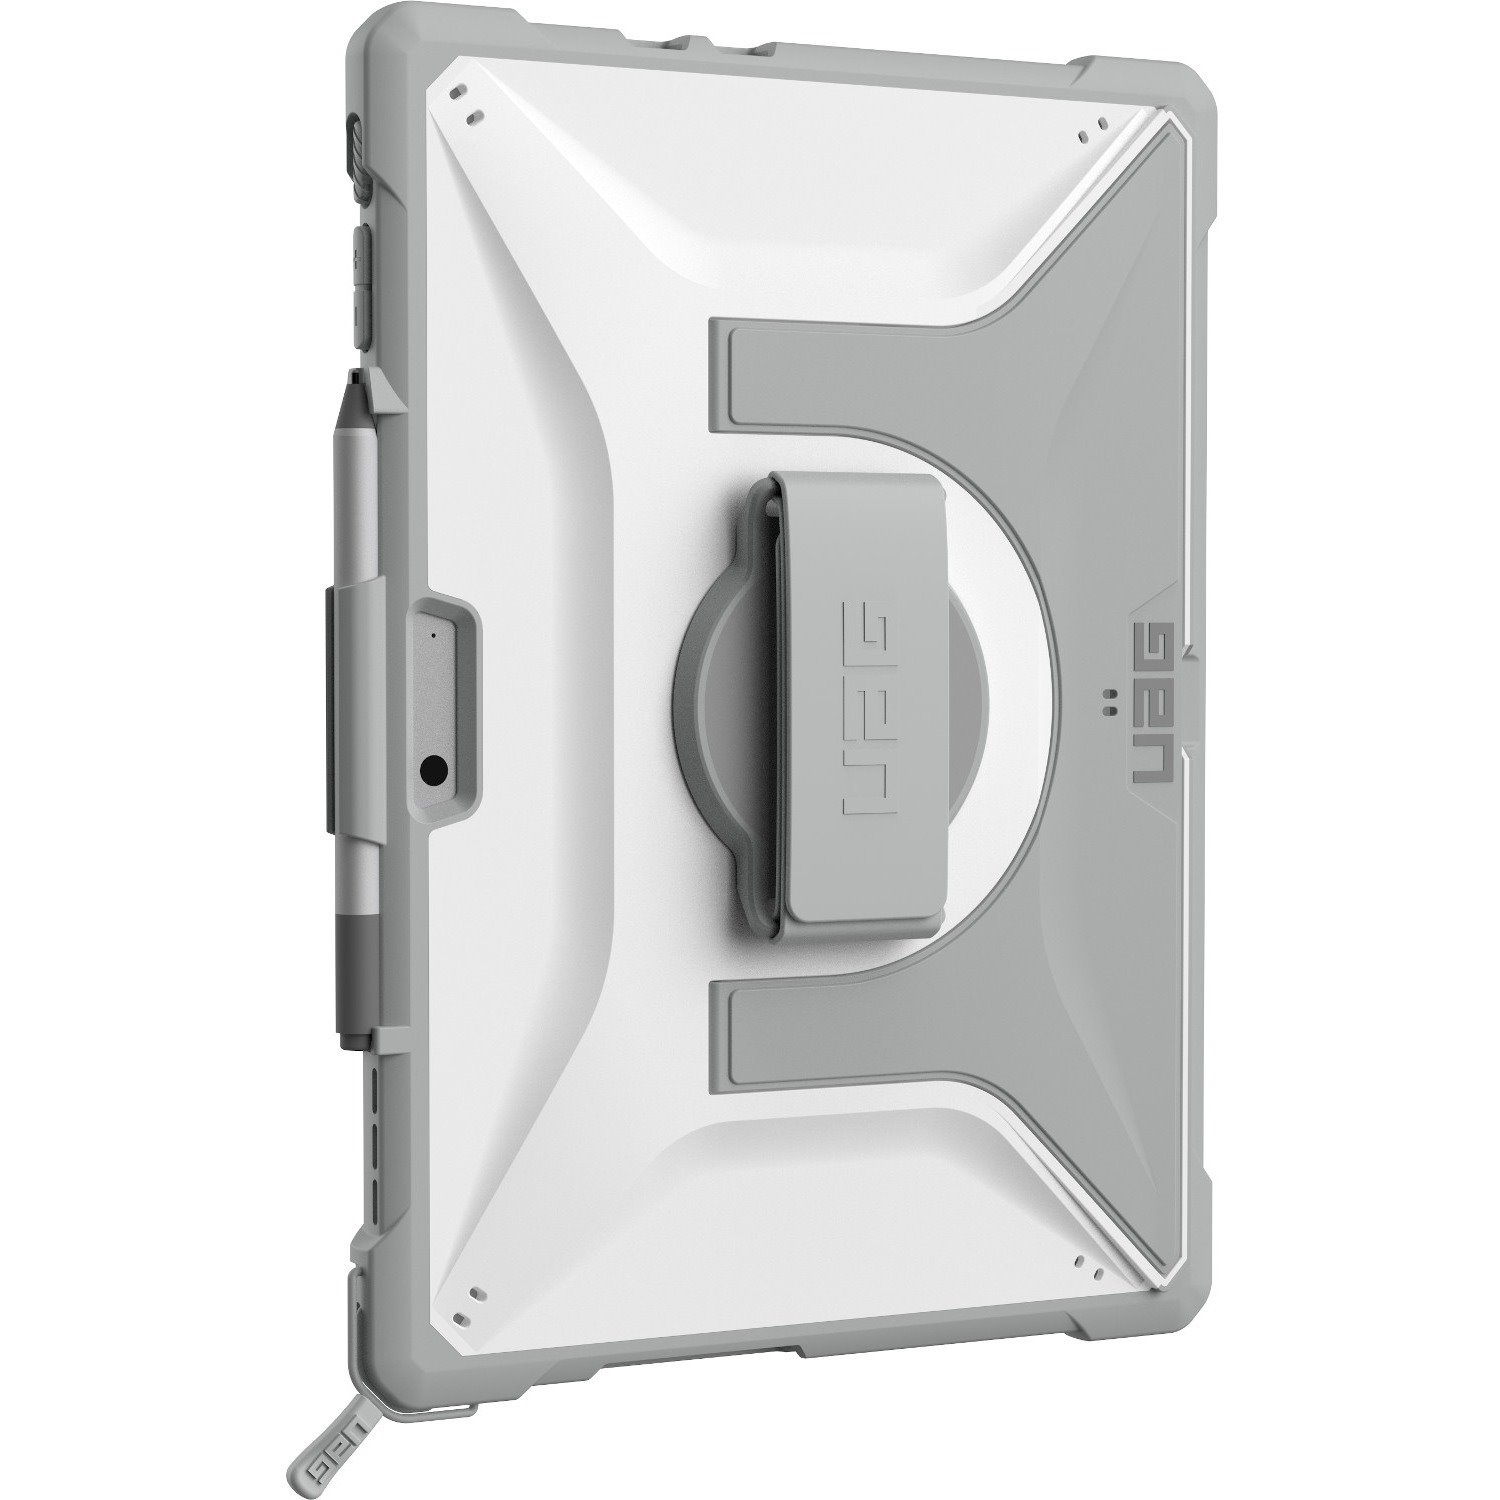 Urban Armor Gear Plasma Carrying Case Microsoft Surface Pro 9 Tablet - White, Gray